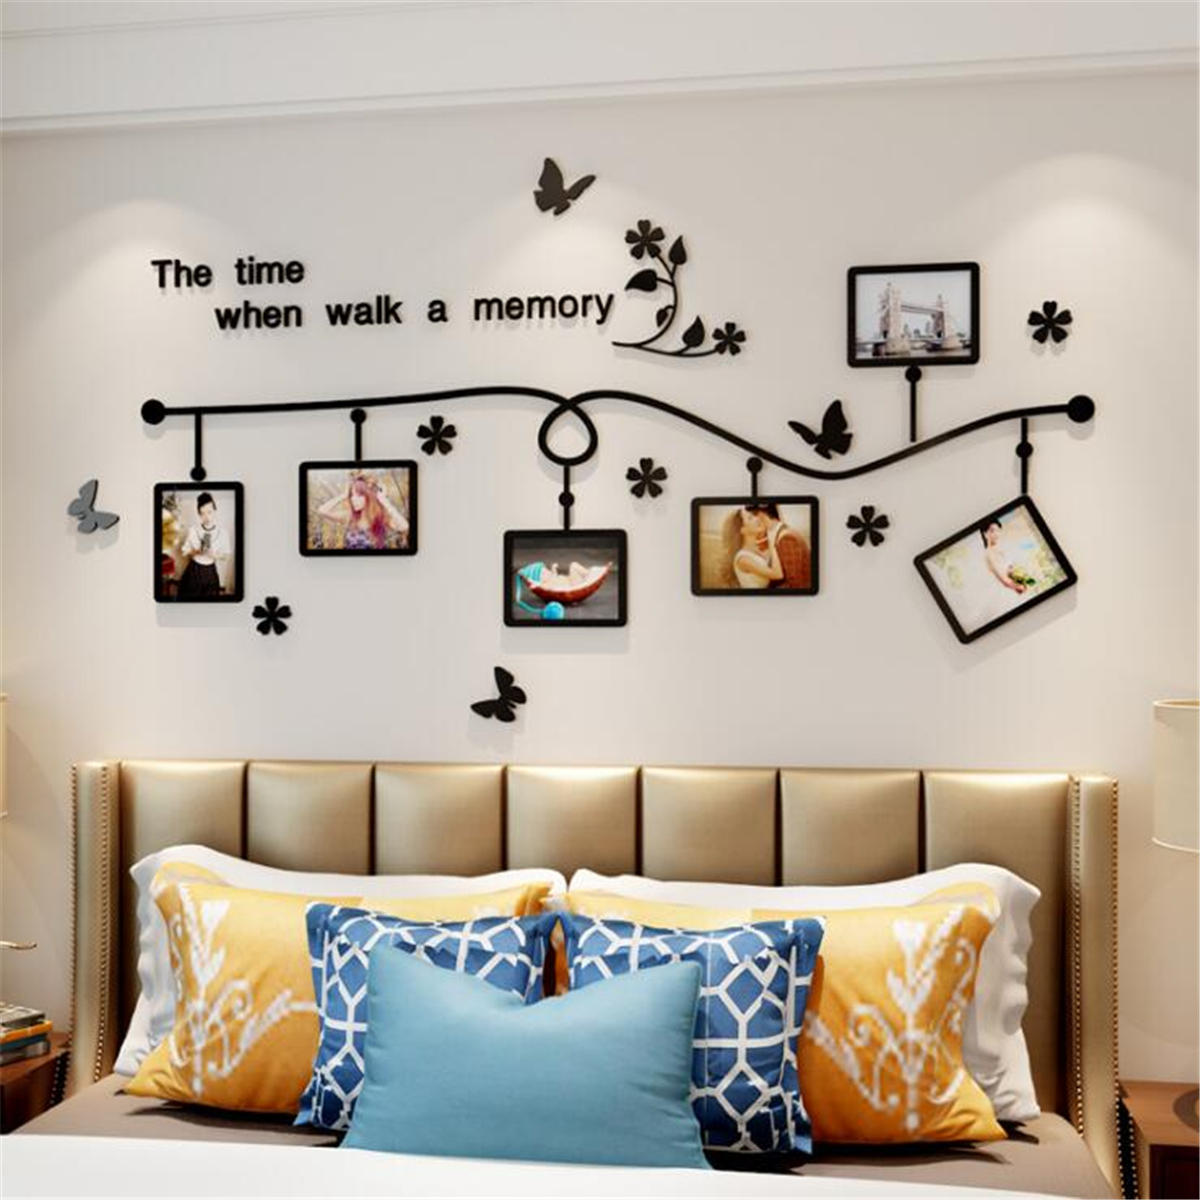 3D Acrylic Photo Frame Wall Sticker Bedroom TV Background Home Office Decorative